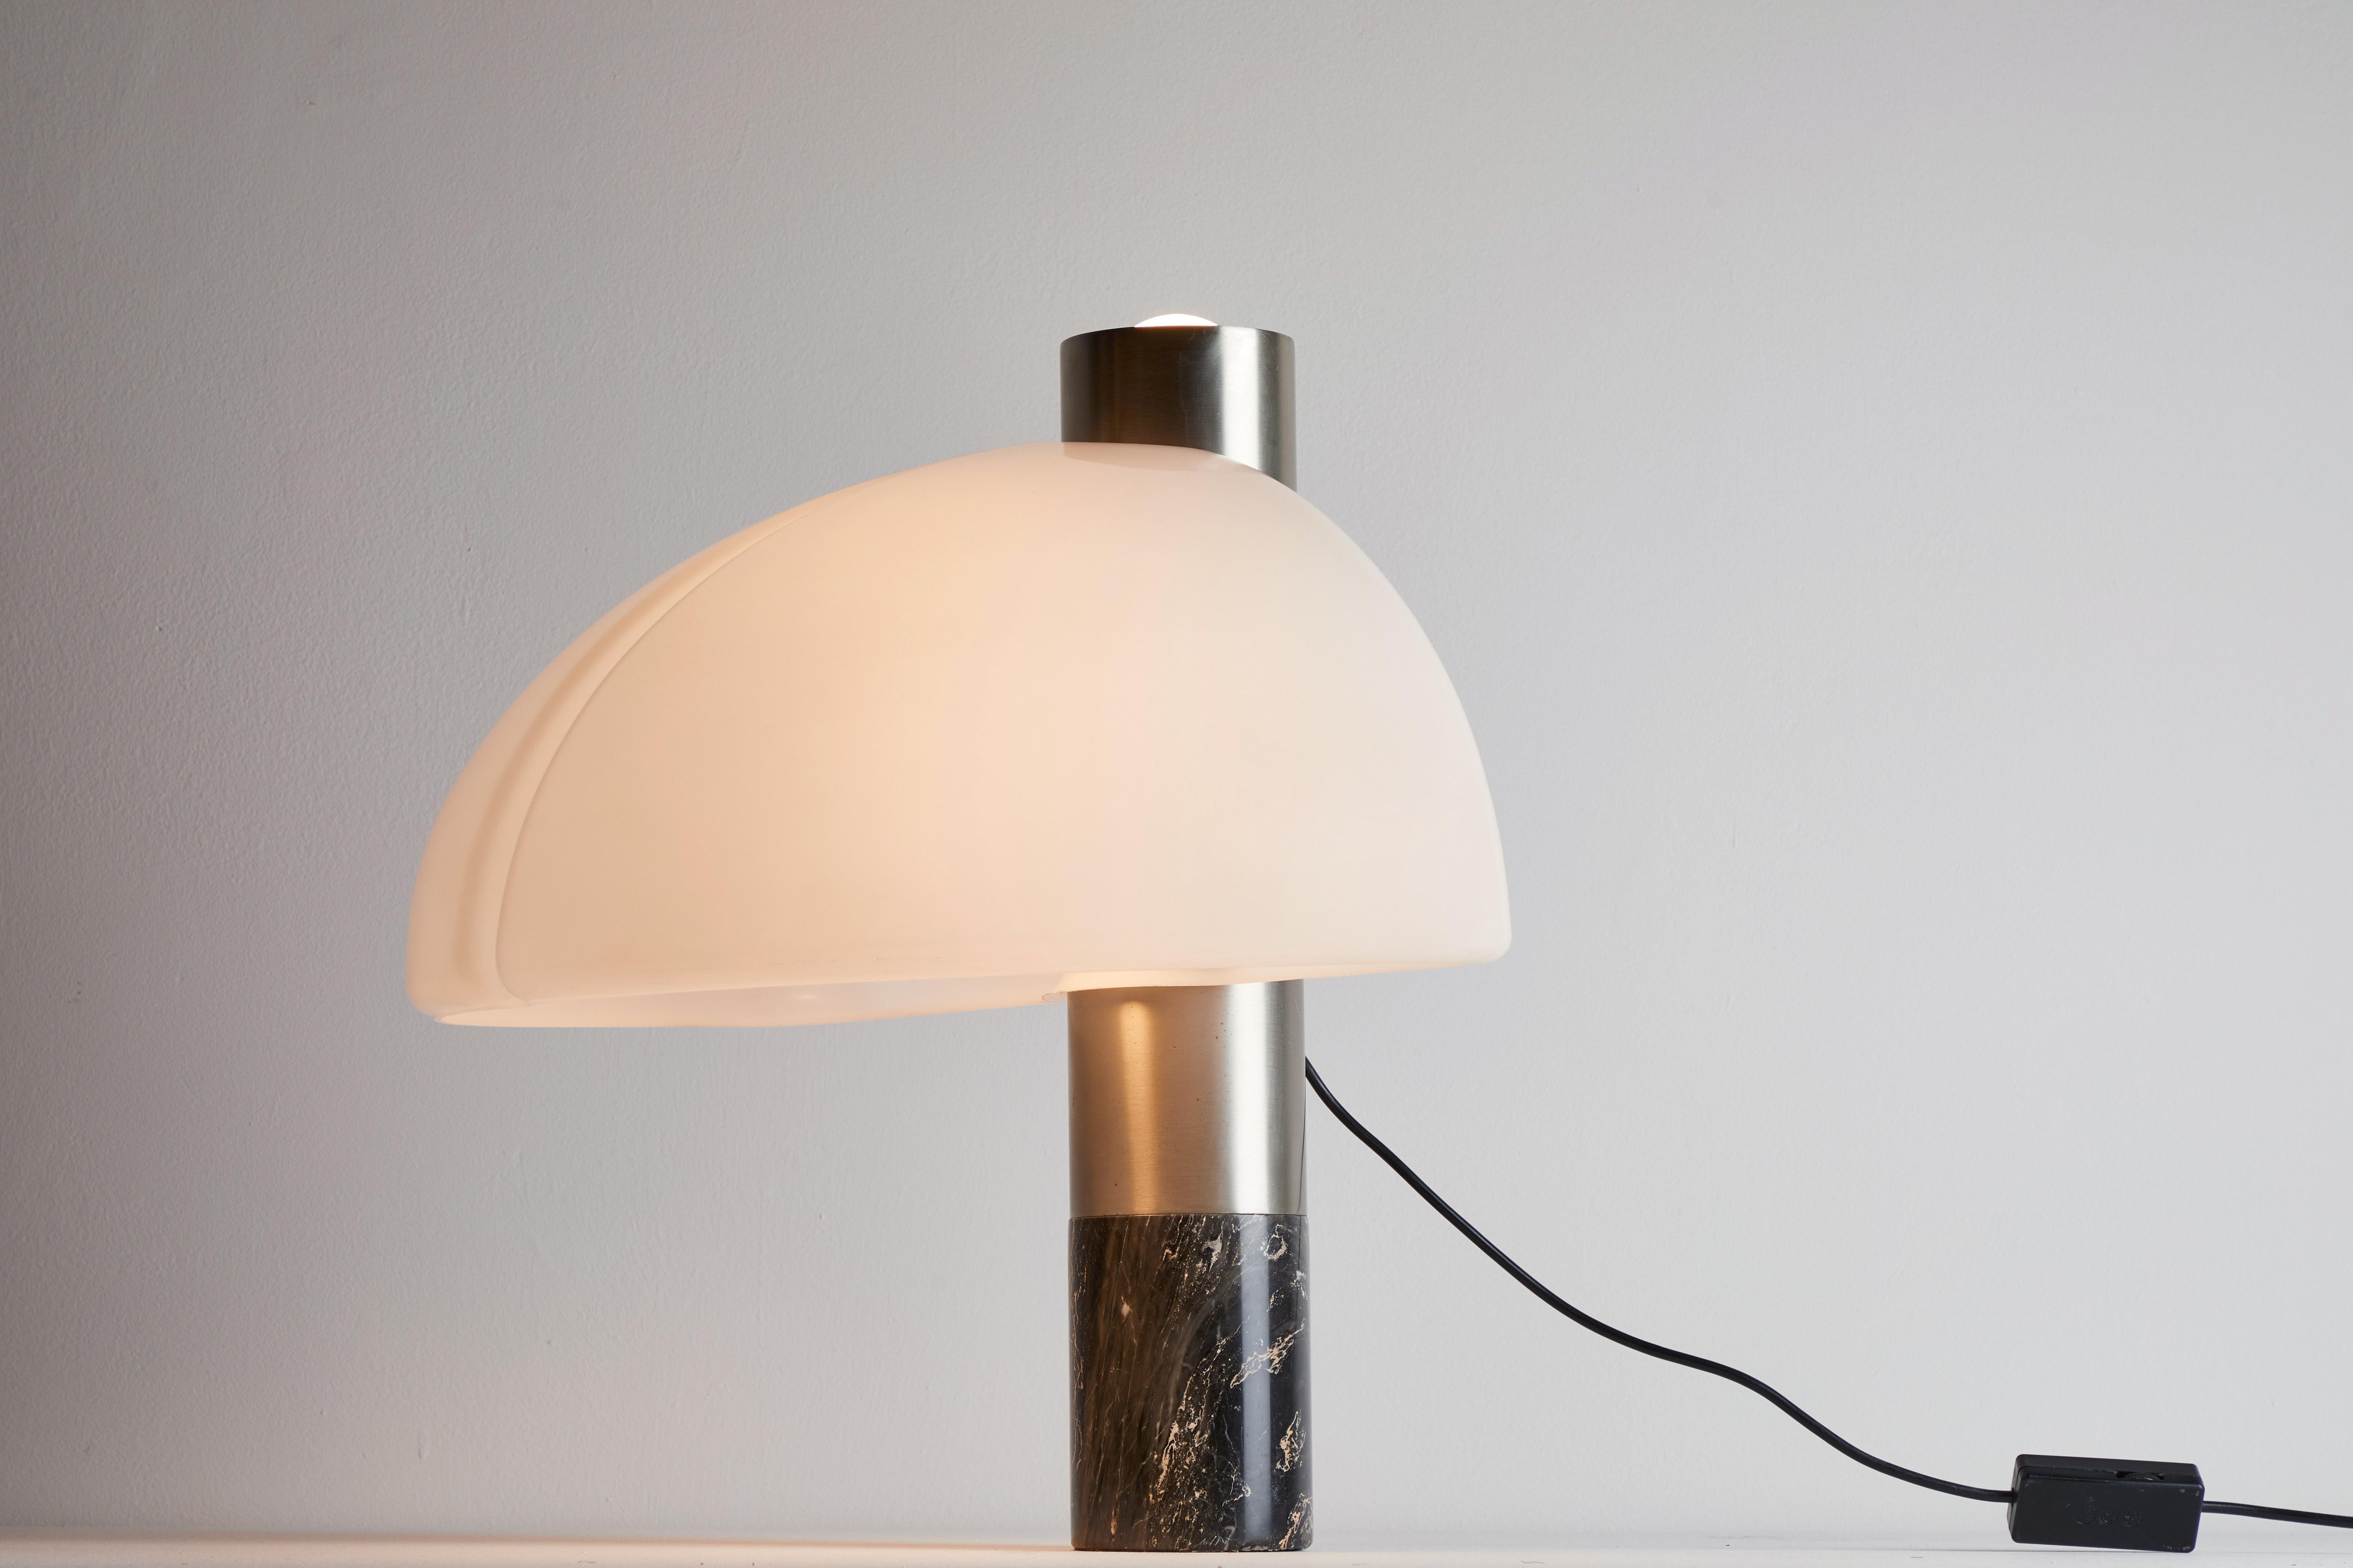 Rare table lamp by Sergio Mazza and Giuliana Gramigna for Quattrifolio Design. Designed and manufactured in Italy, circa 1970s. Original aluminum, marble and perspex. Rewired for U.S. standards. Original cord. This fixture has two sockets. We